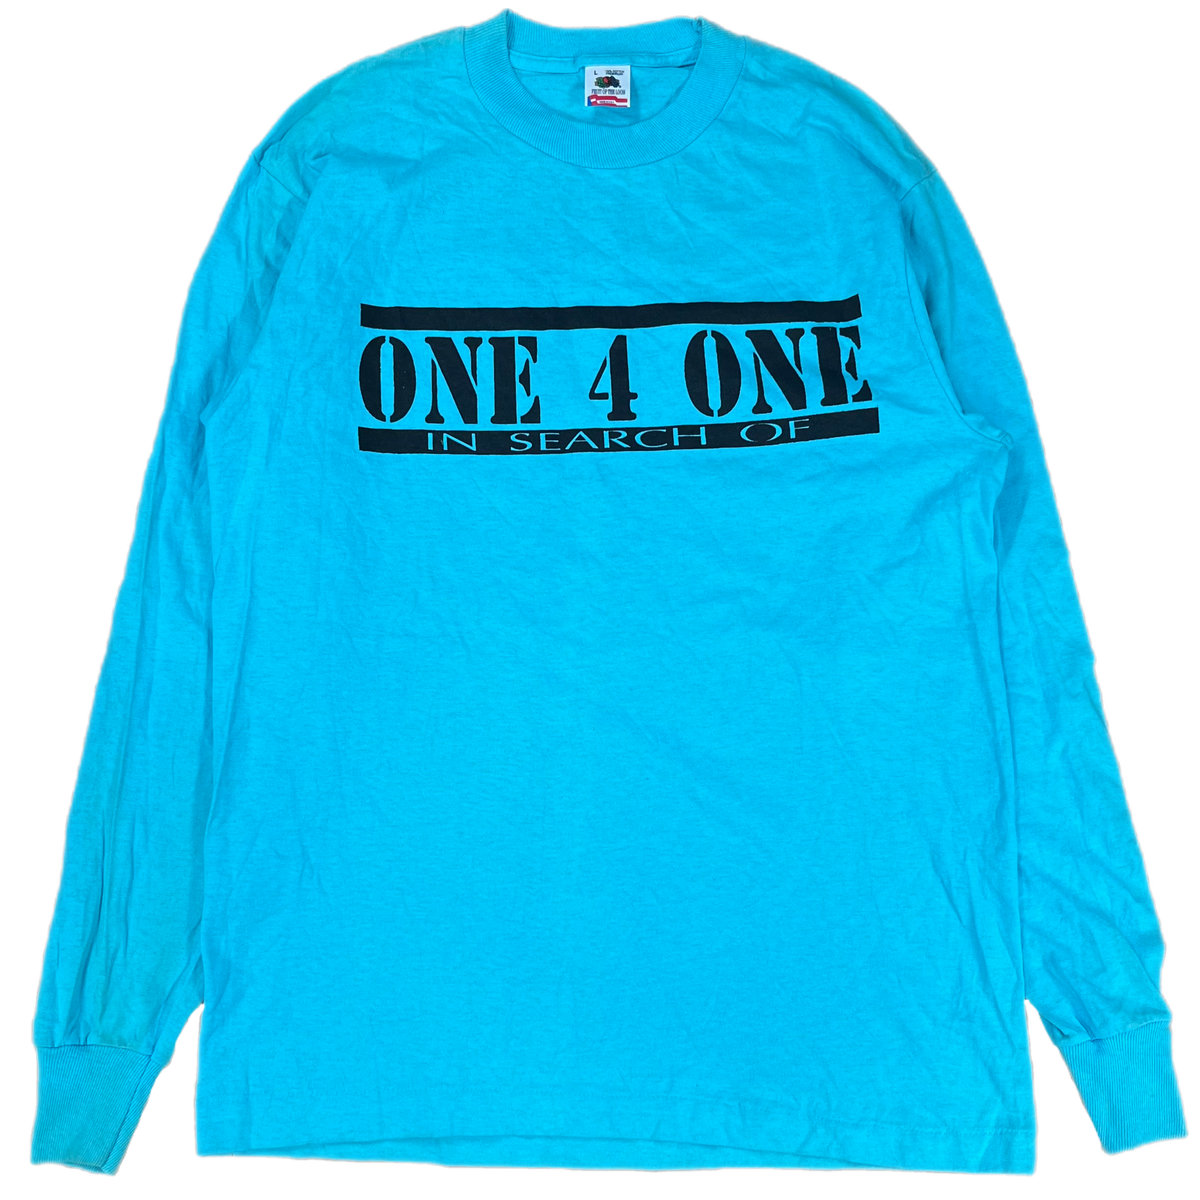 Vintage One 4 One &quot;In Search Of&quot; Long Sleeve Shirt